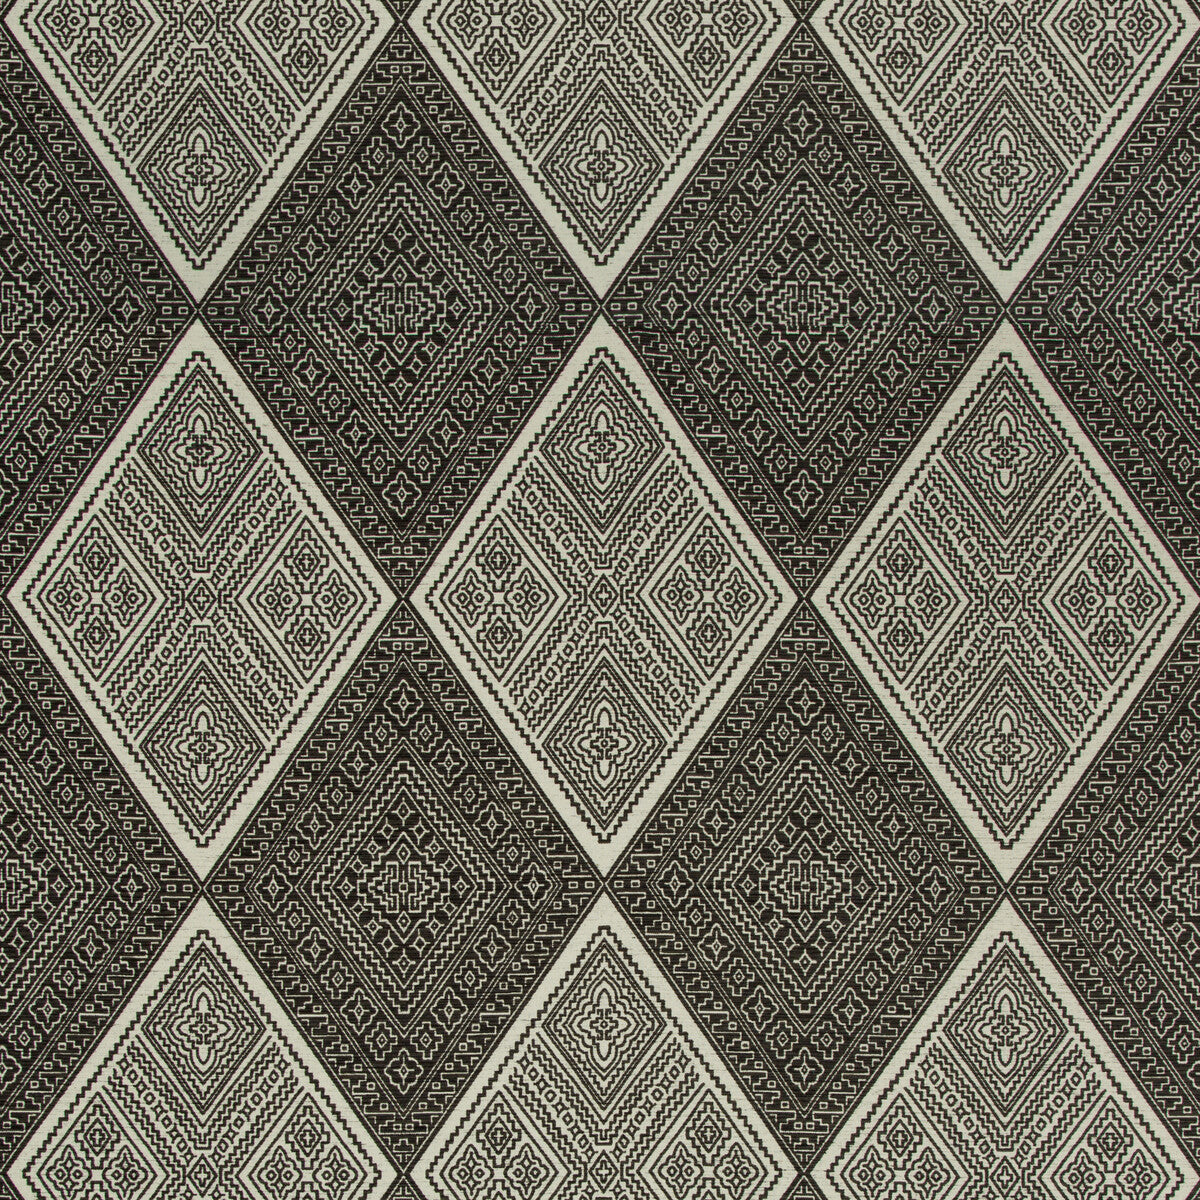 Kravet Design fabric in 35000-8 color - pattern 35000.8.0 - by Kravet Design in the Performance Crypton Home collection